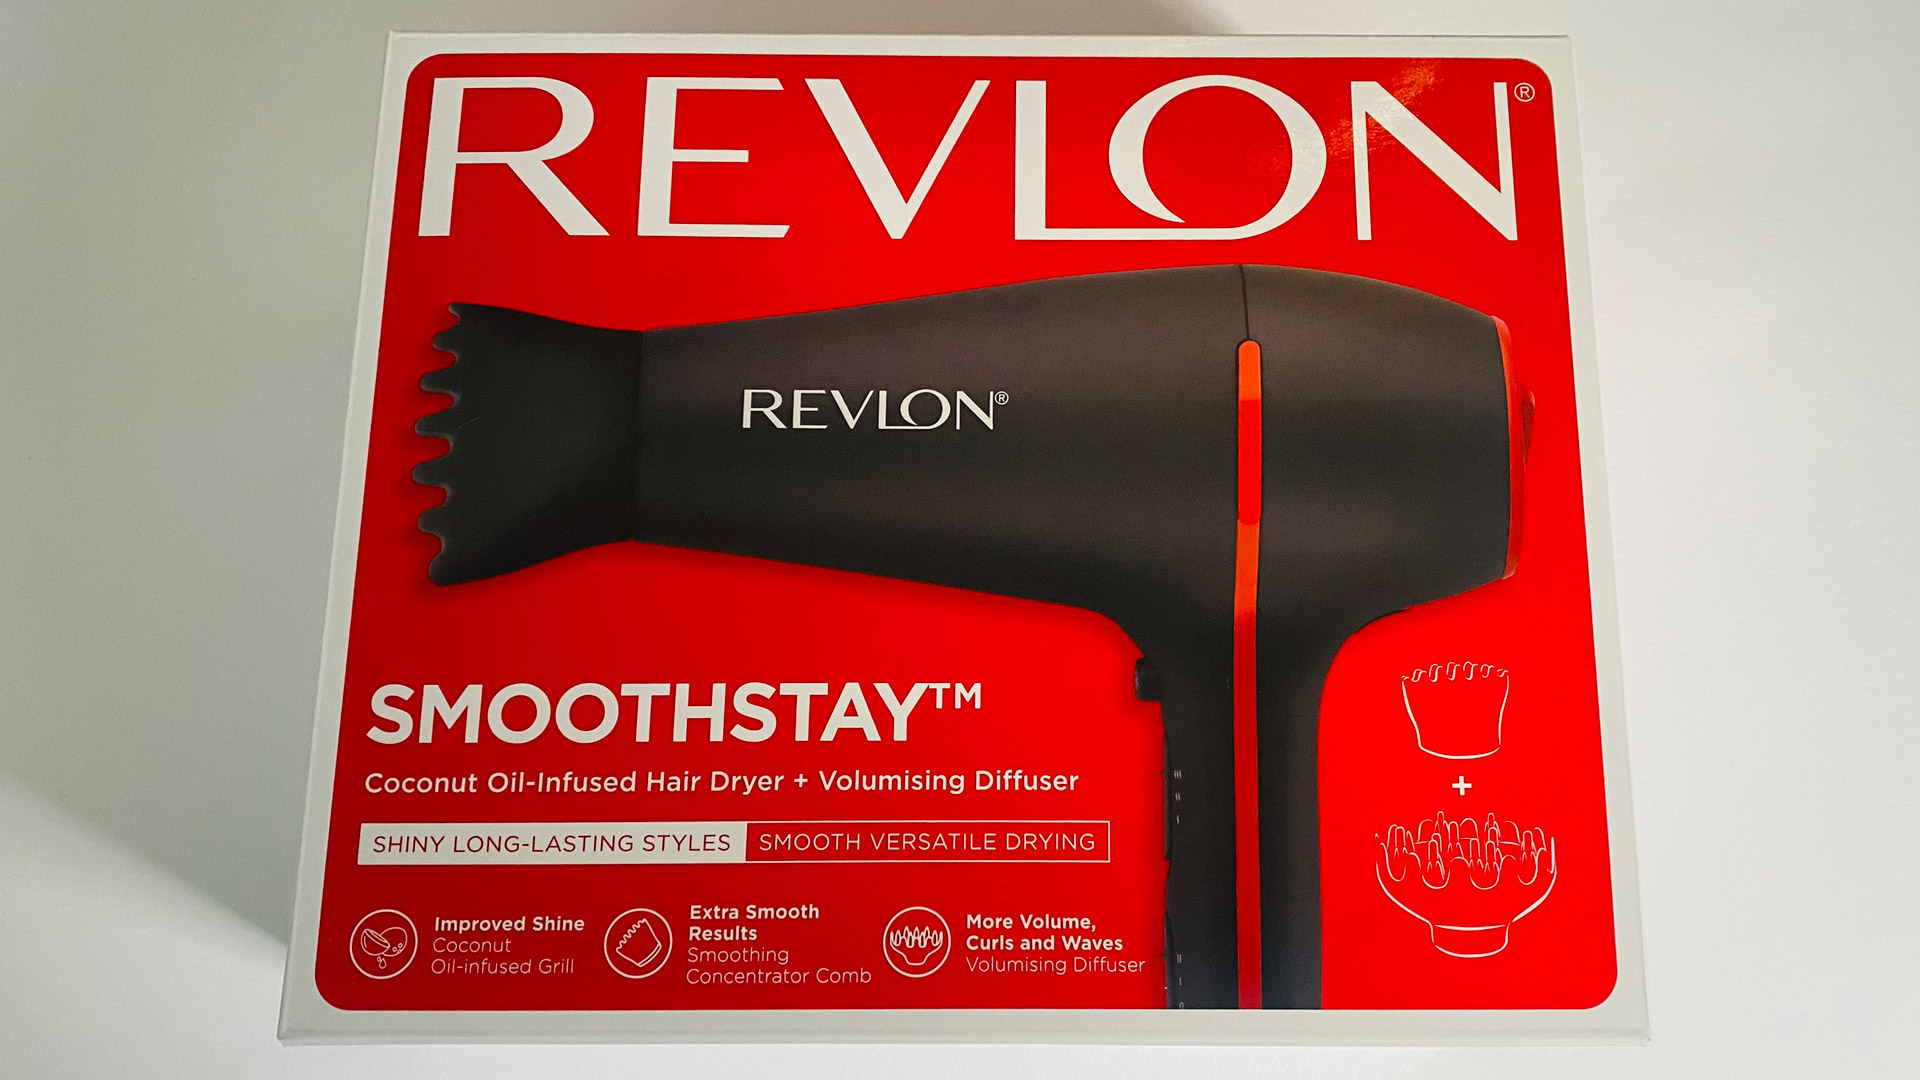 The Revlon SmoothStay Coconut-Oil Infused Hair Dryer box